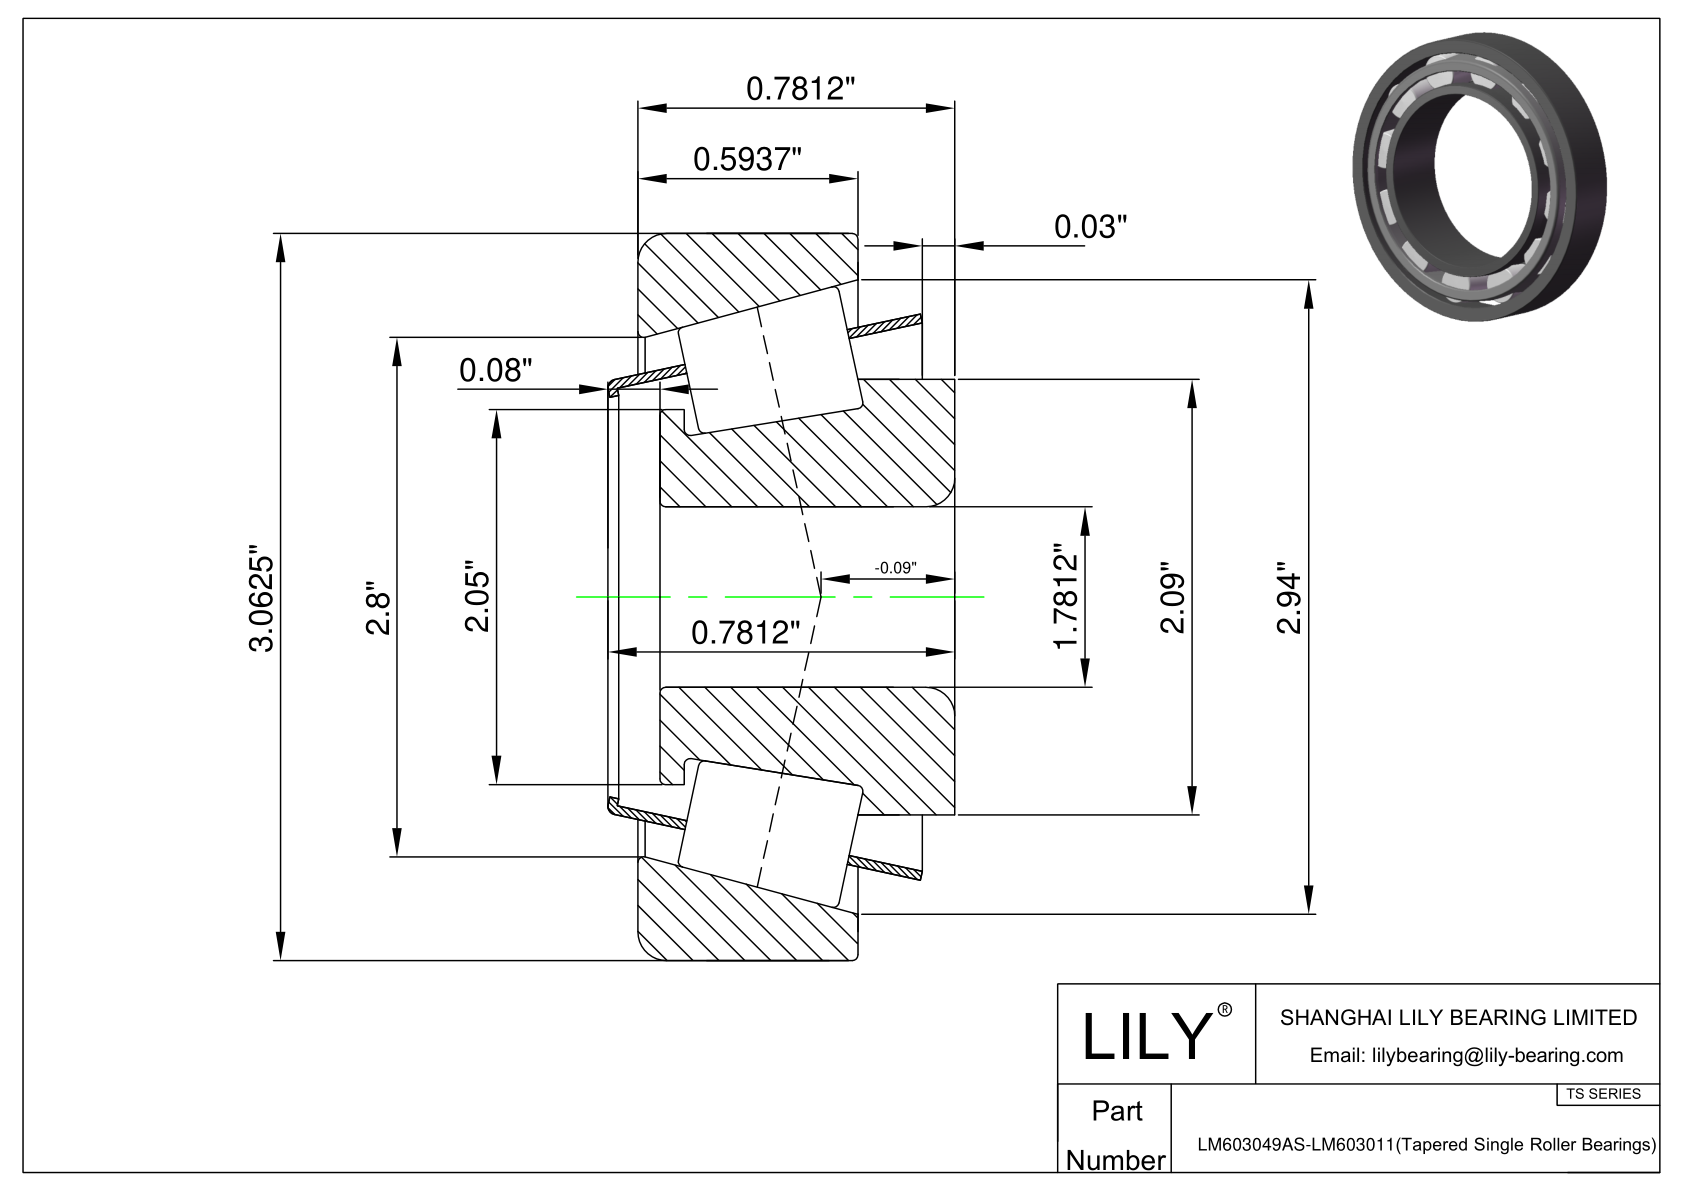 LM603049AS-LM603011 TS (Tapered Single Roller Bearings) (Imperial) cad drawing